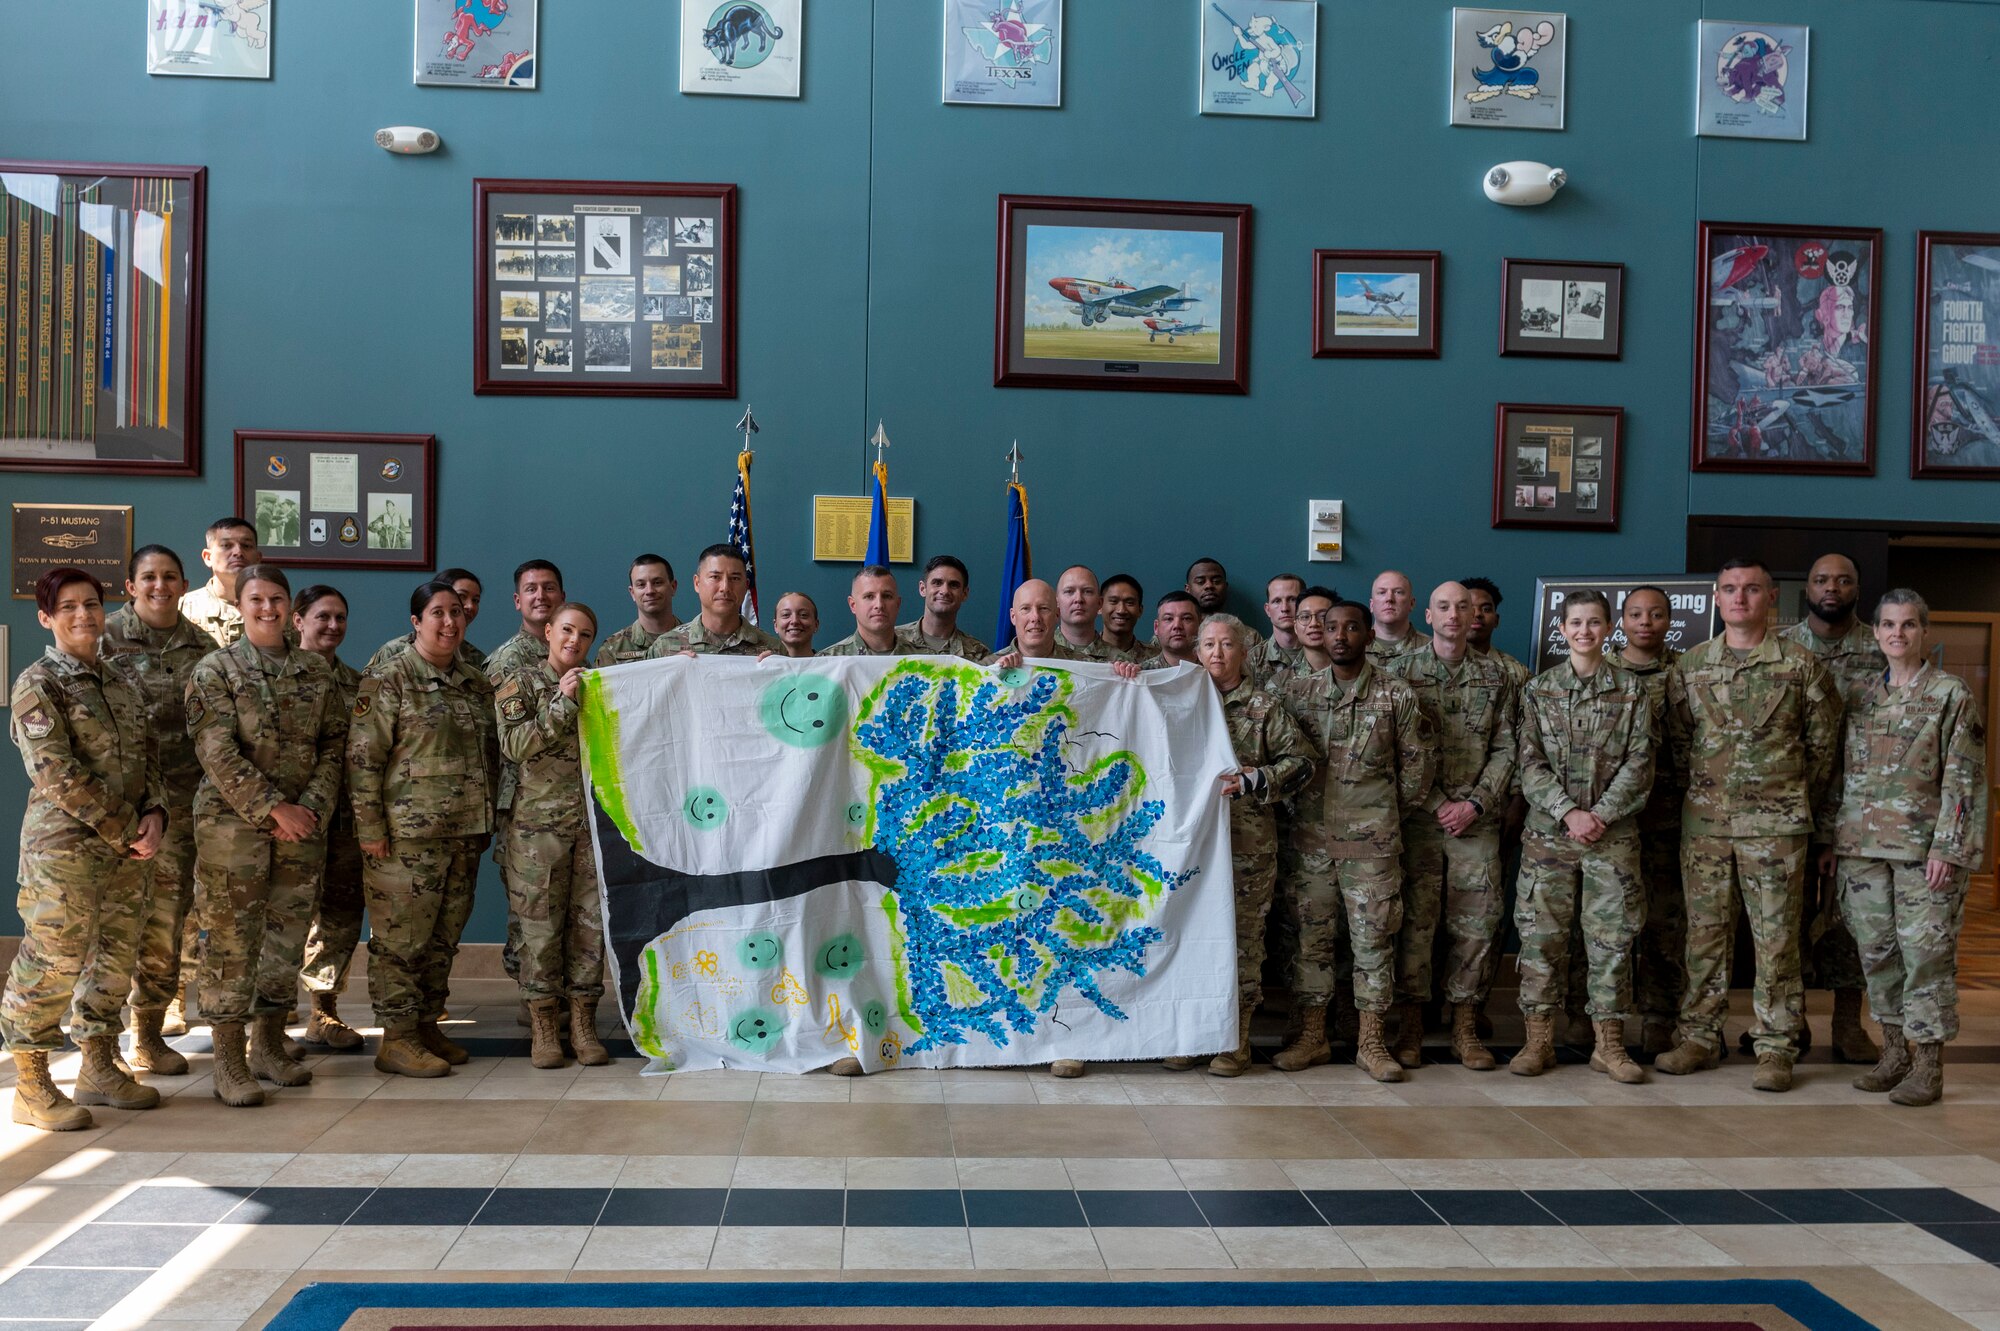 Brig. Gen. Daniel Gabrielli, Minnesota Air National Guard’s Assistant Adjutant General Guard and former commander for Task Force Holloman during Operation Allies Welcome, and Airmen assigned to the 4th Fighter Wing pose for a photo while holding up a painting at Seymour Johnson Air Force Base, North Carolina, May 20, 2022. From Aug. 31, 2021, to Jan. 26, 2022, Task Force Holloman provided temporary housing and support services for approximately 7,100 Afghan guests after the evacuation of Afghanistan took place in early August. (U.S. Air Force photo by Senior Airman Kevin Holloway)